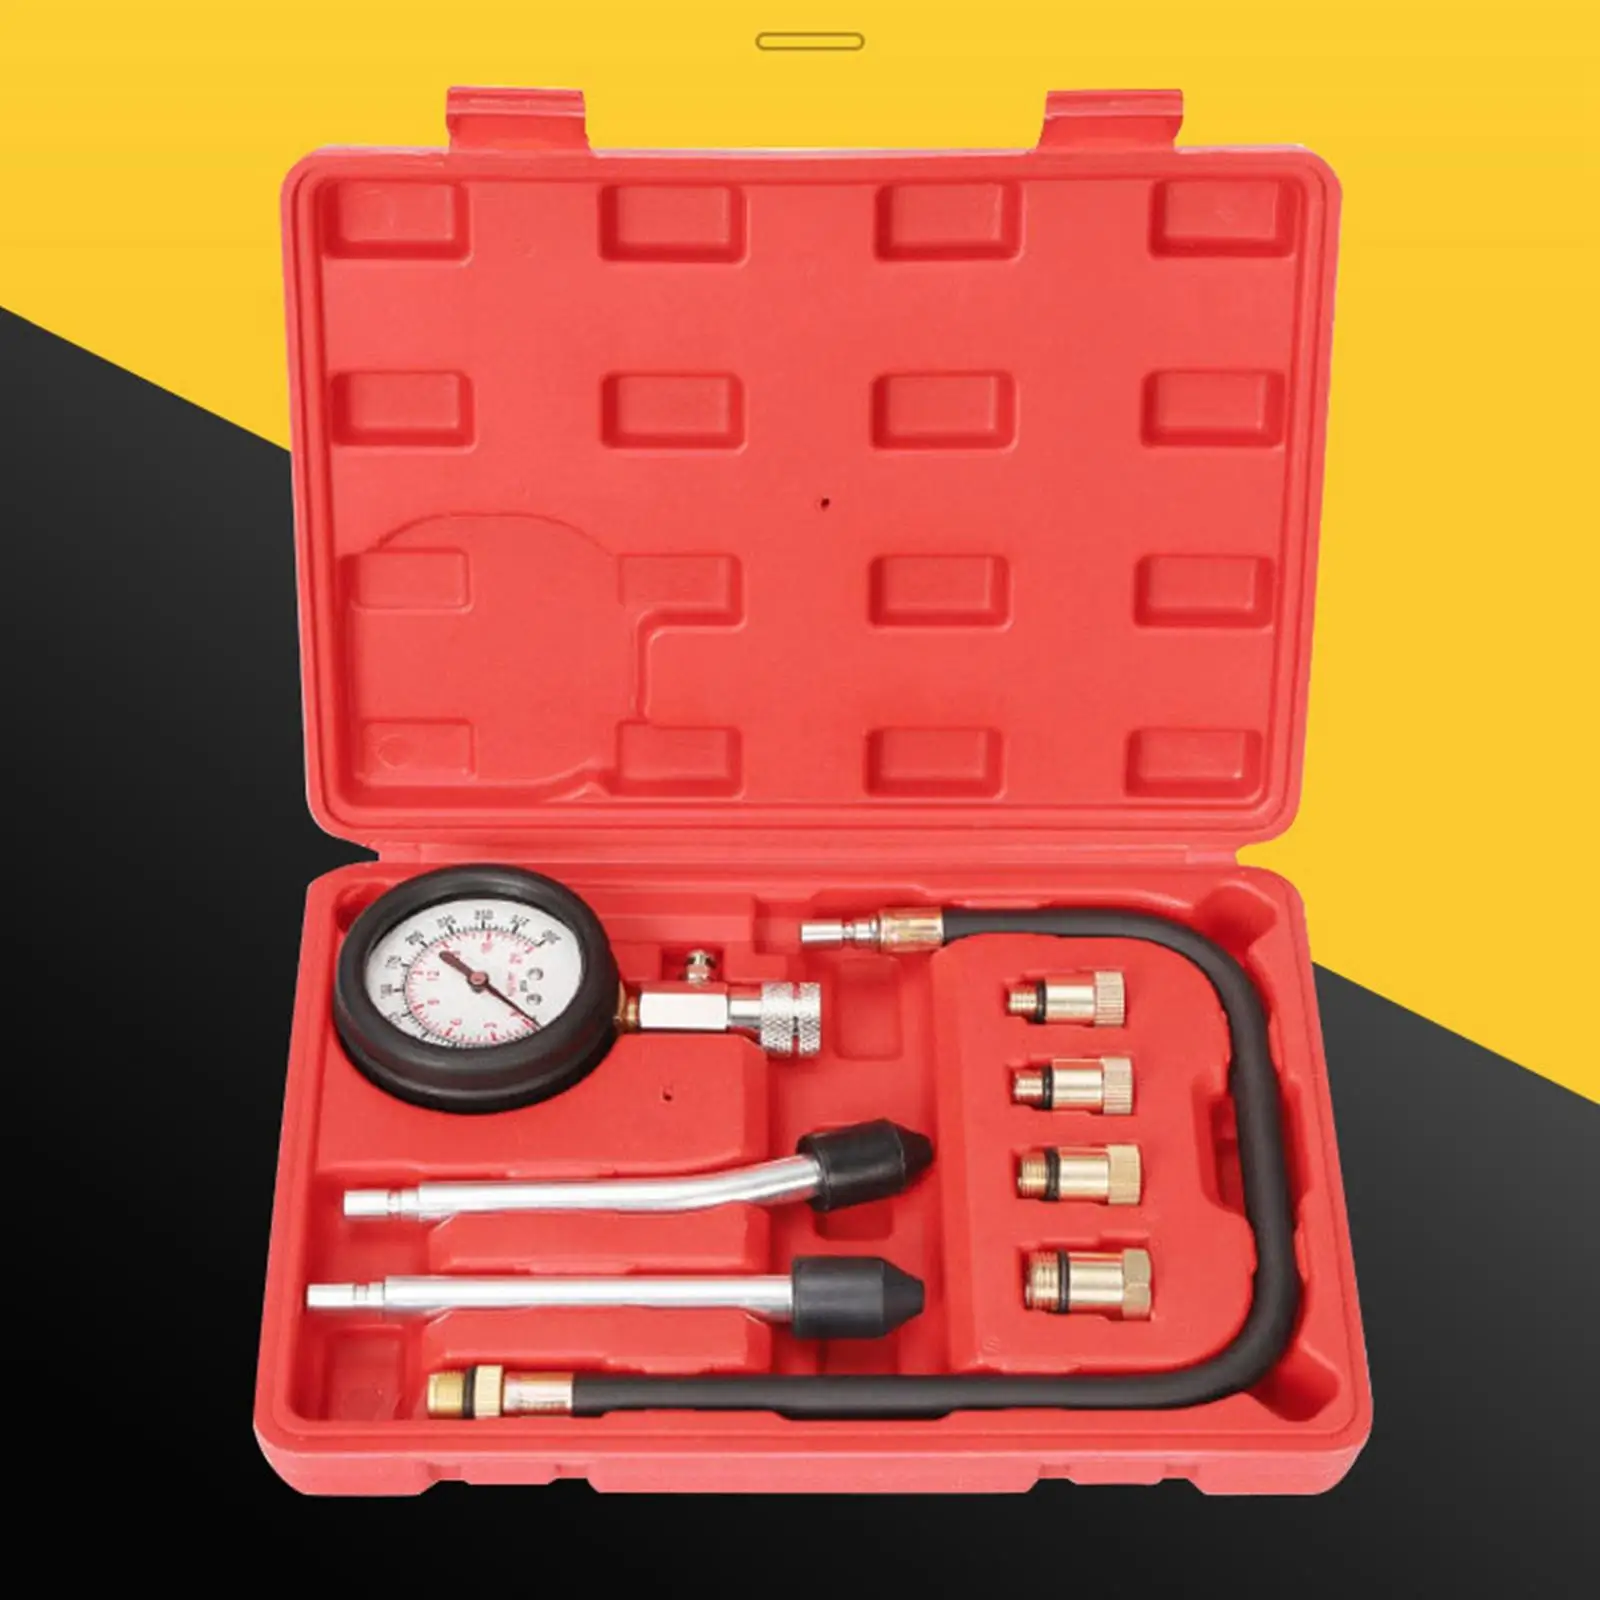 Set of 8 Petrol Engine Cylinder Compression Tester Tool with Case Easy Carrying and Storing High Precision Durable Hardware